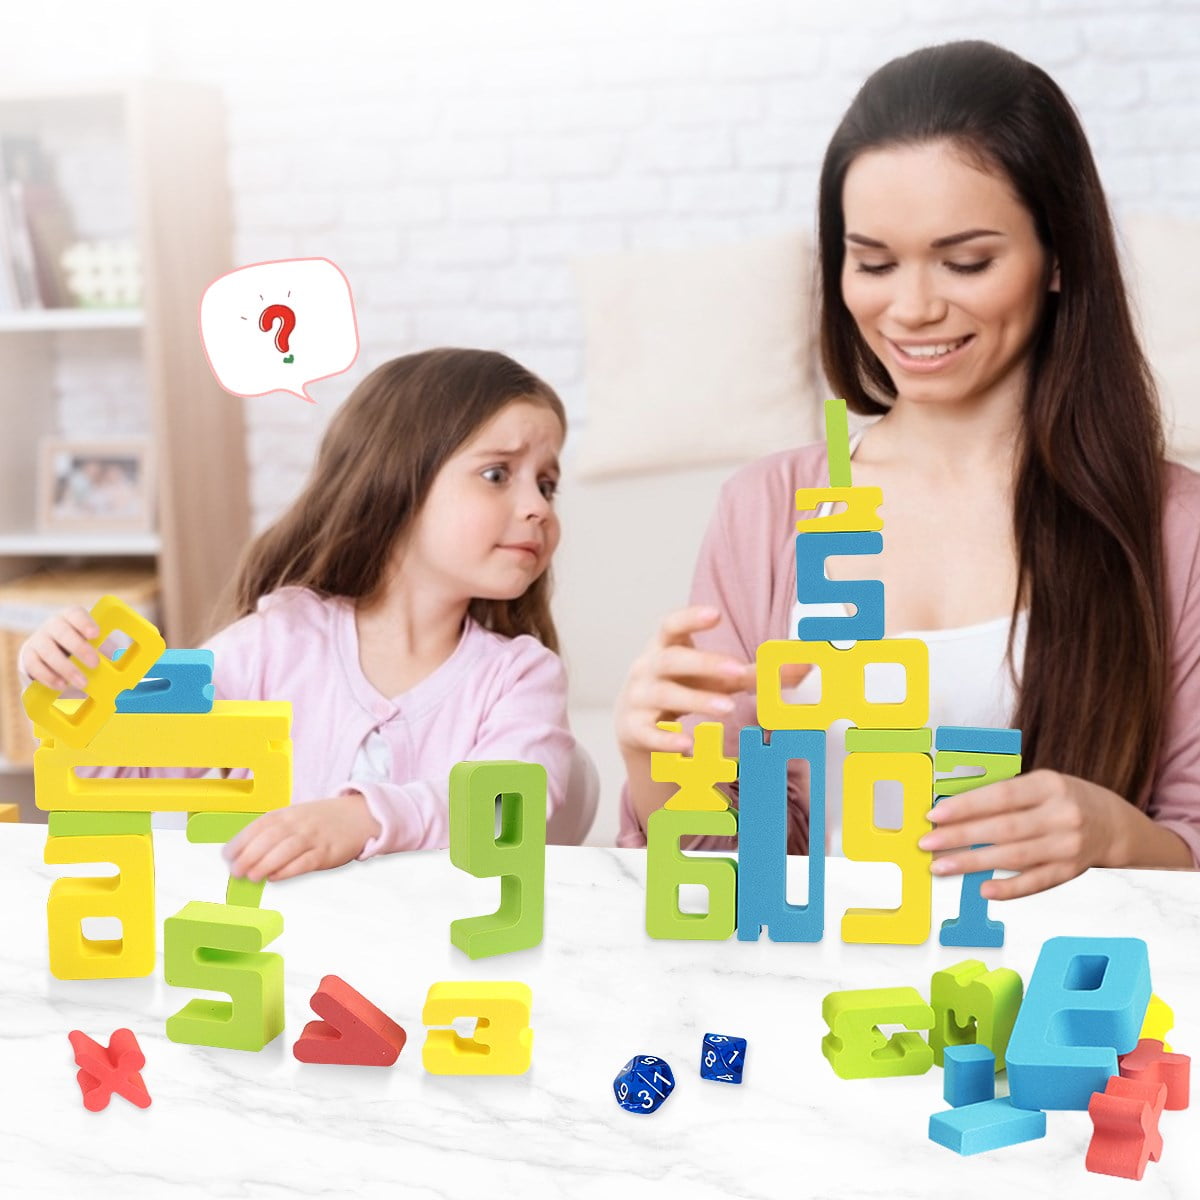 40 Large Jumbo ABC Blocks for Babies Toddlers Kids Baby Shower Decorations. Beautiful Wooden Set of Engraved Alphabet Letters & Numbers Perfect